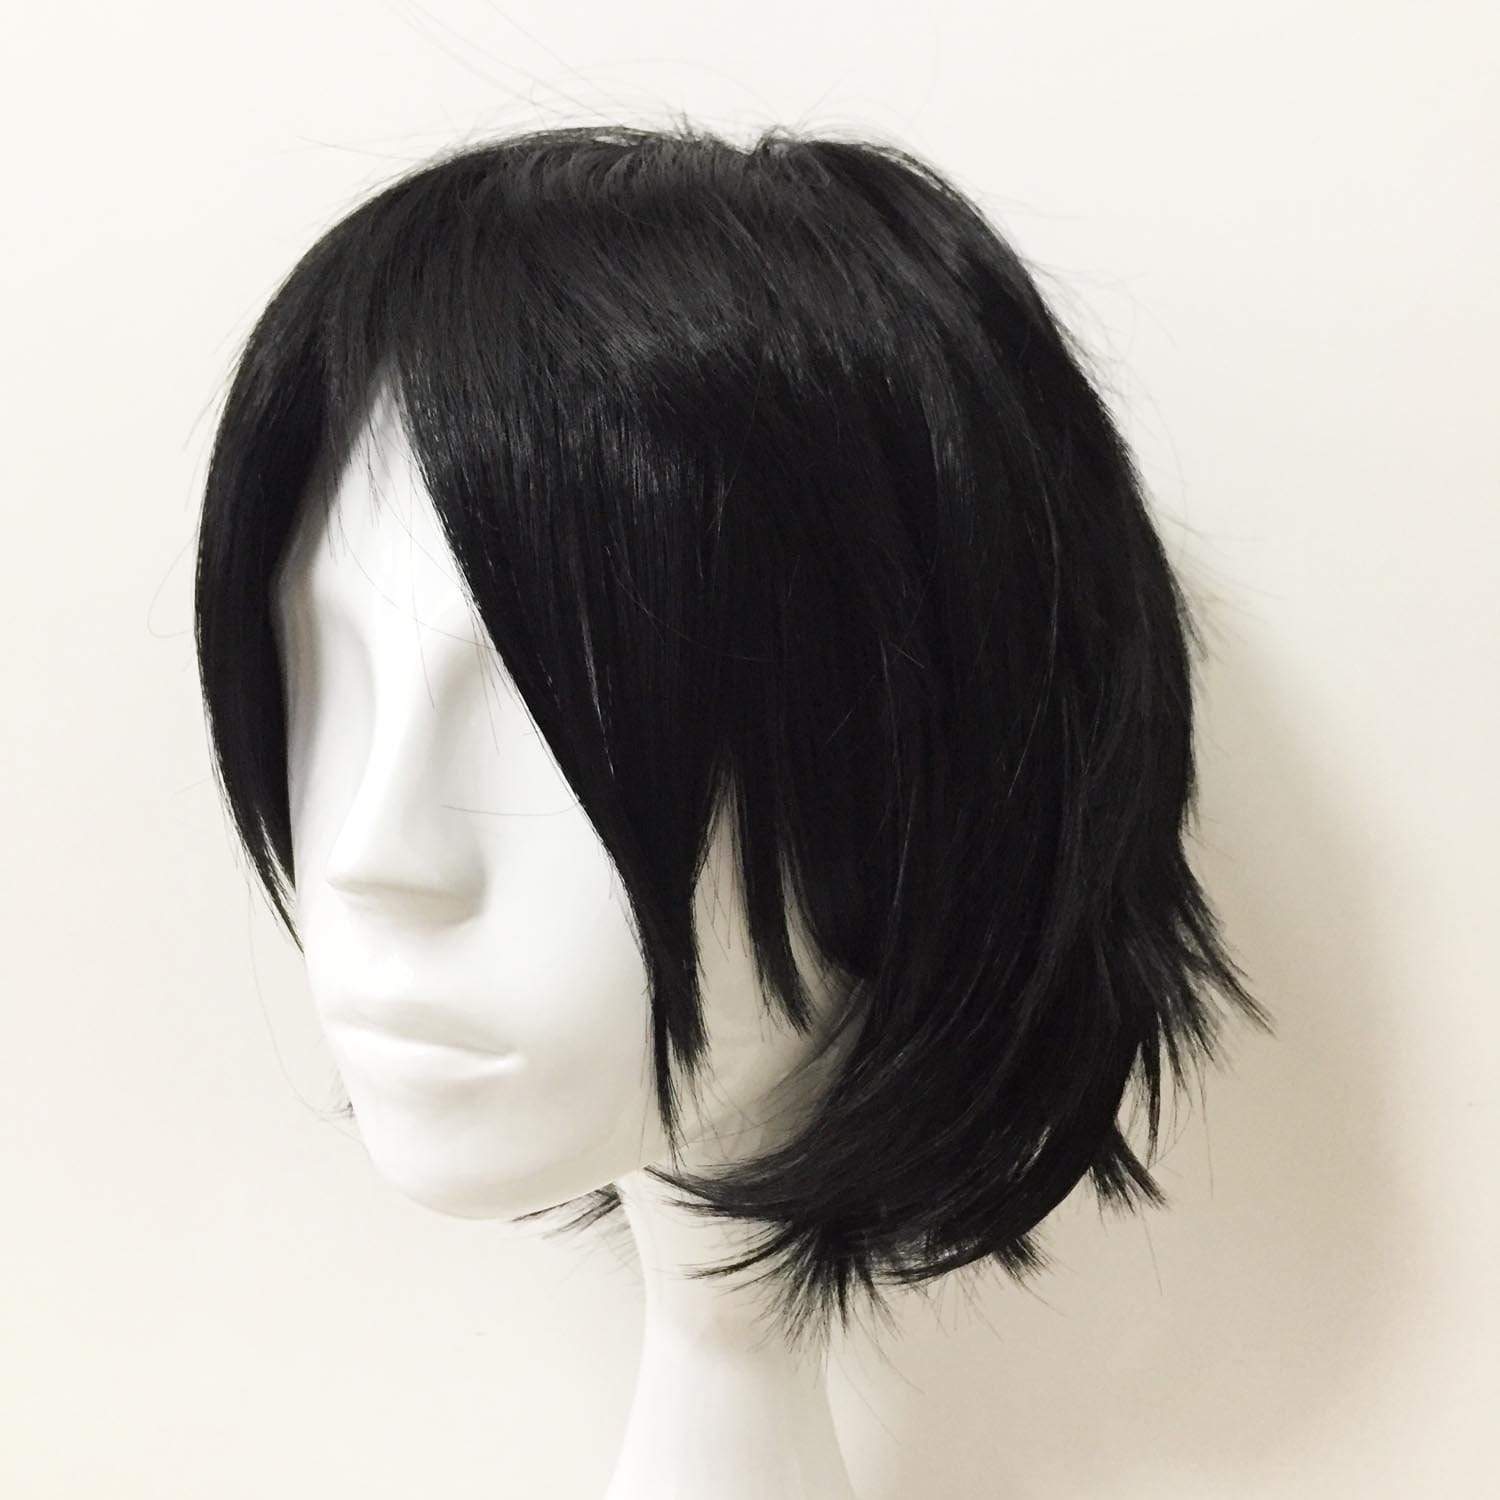 nevermindyrhead Men Black Straight Long Bangs Middle Part Cosplay Wig